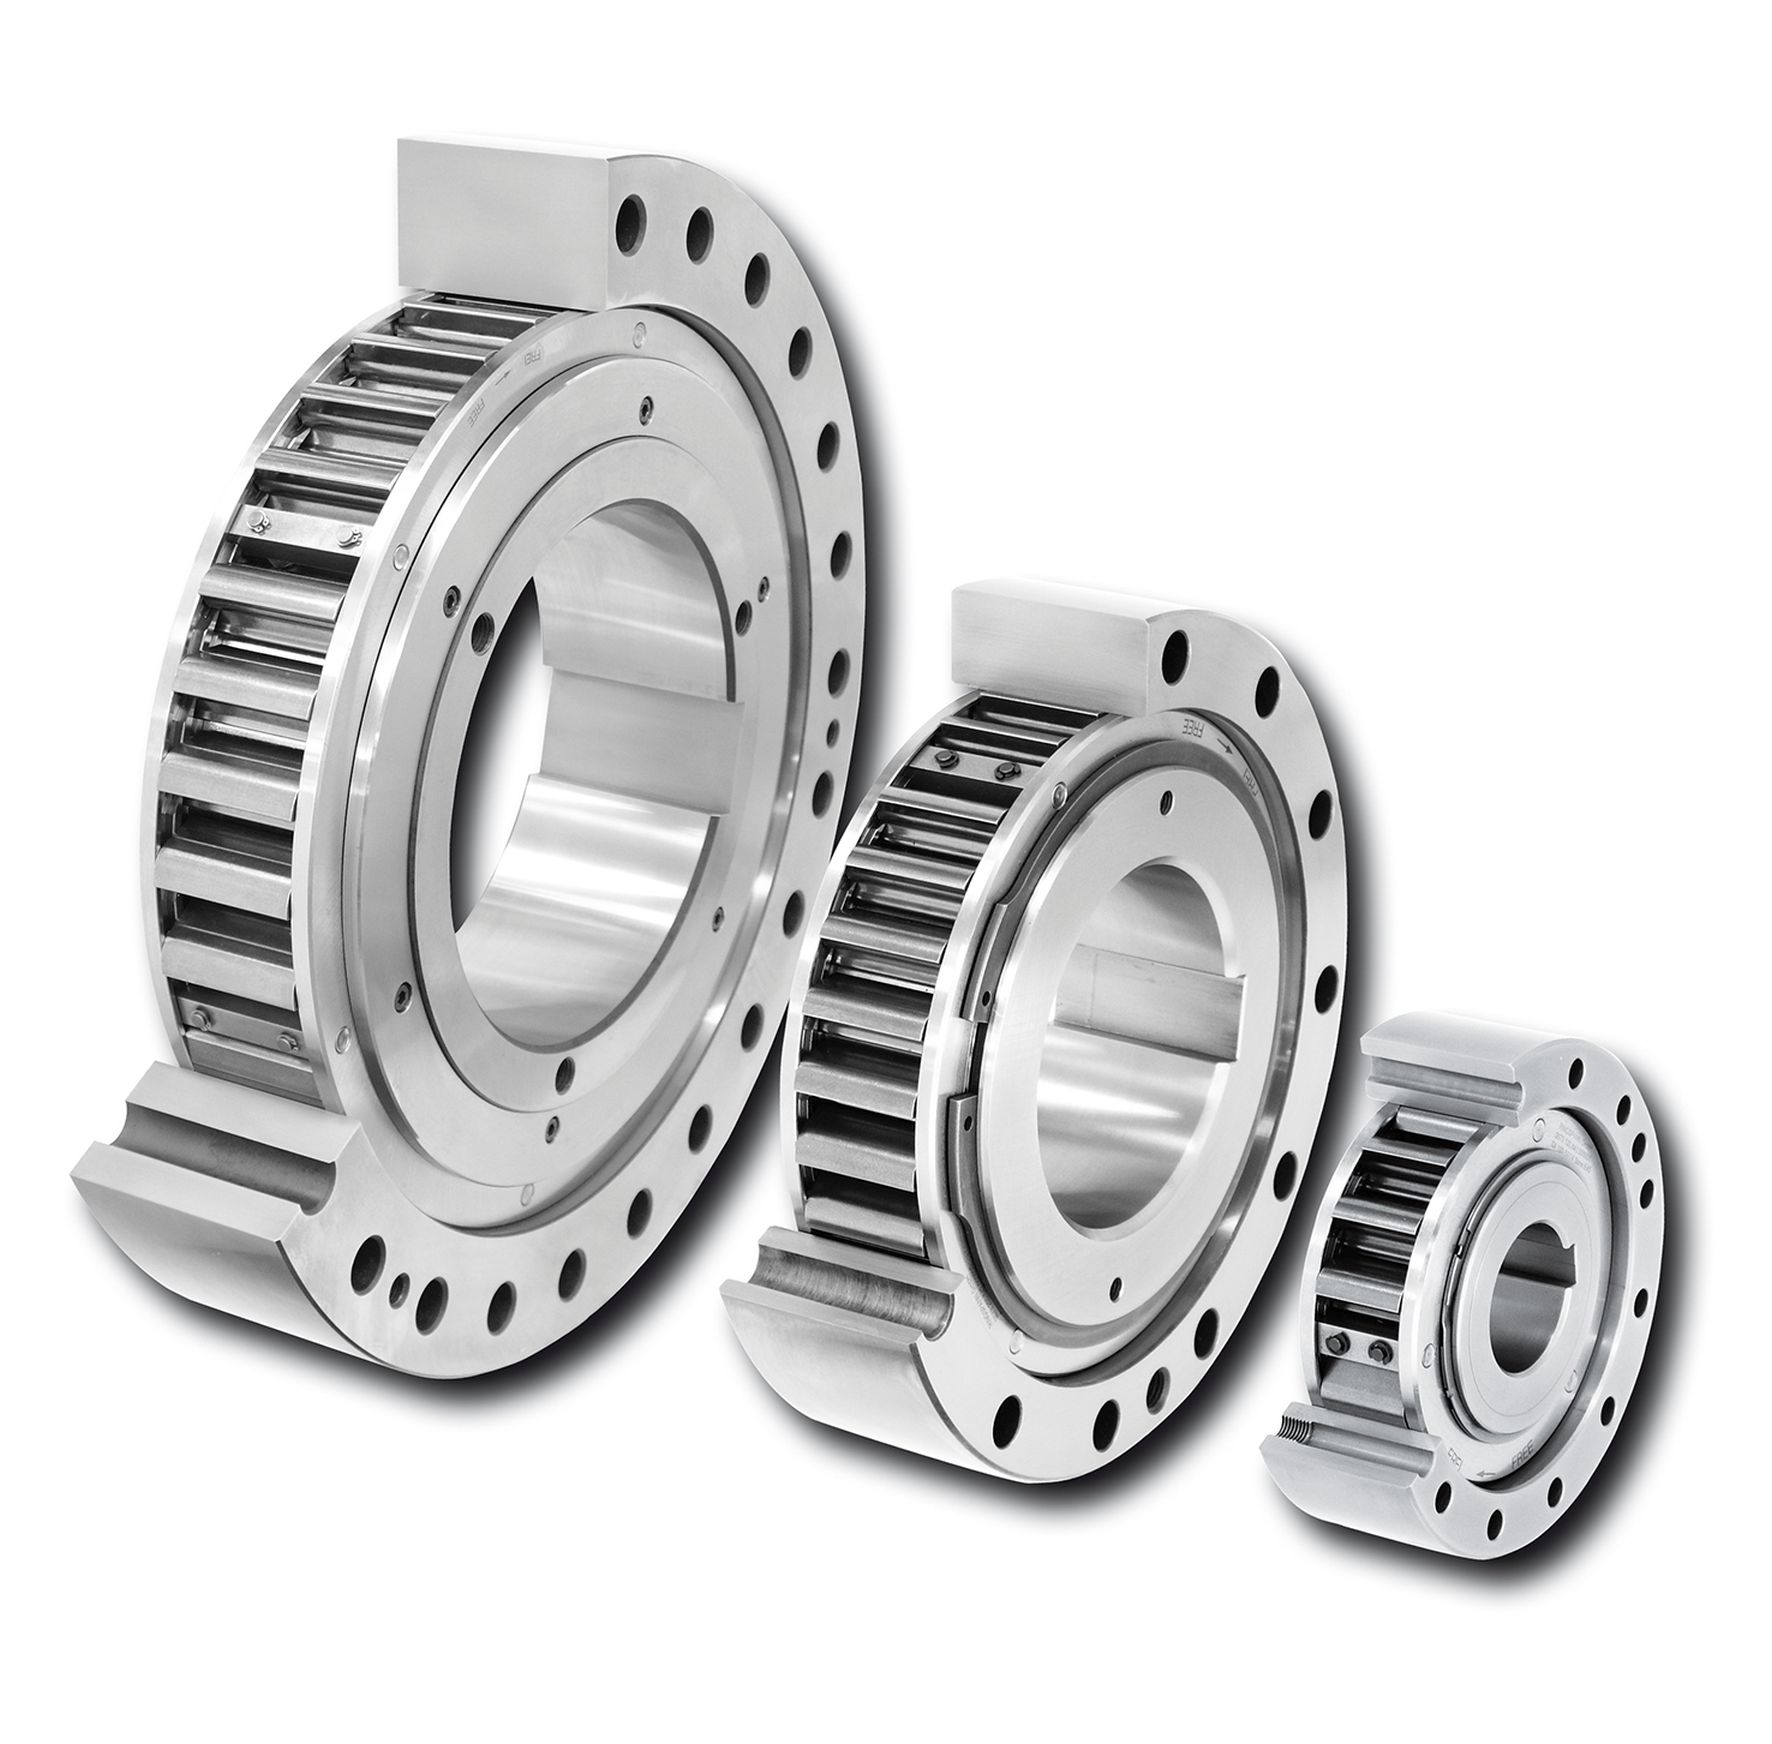 integrated freewheels of the FXM series from RINGSPANN